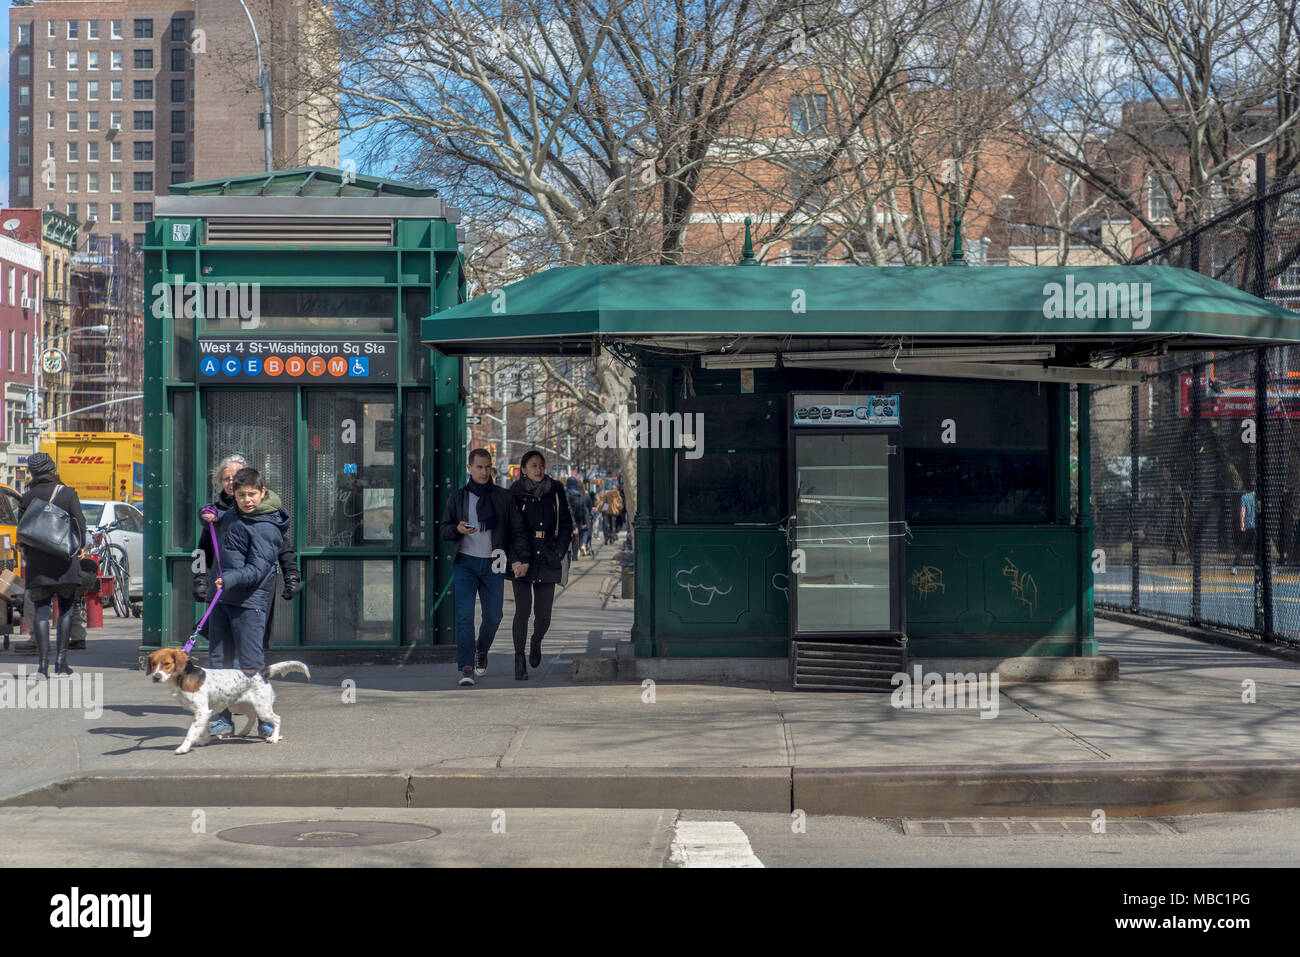 New York, NY, USA 5 April 2018 - One of the oldest newsstands in Manhattan closed earlier this year. ©Stacy Walsh Rosenstock Stock Photo